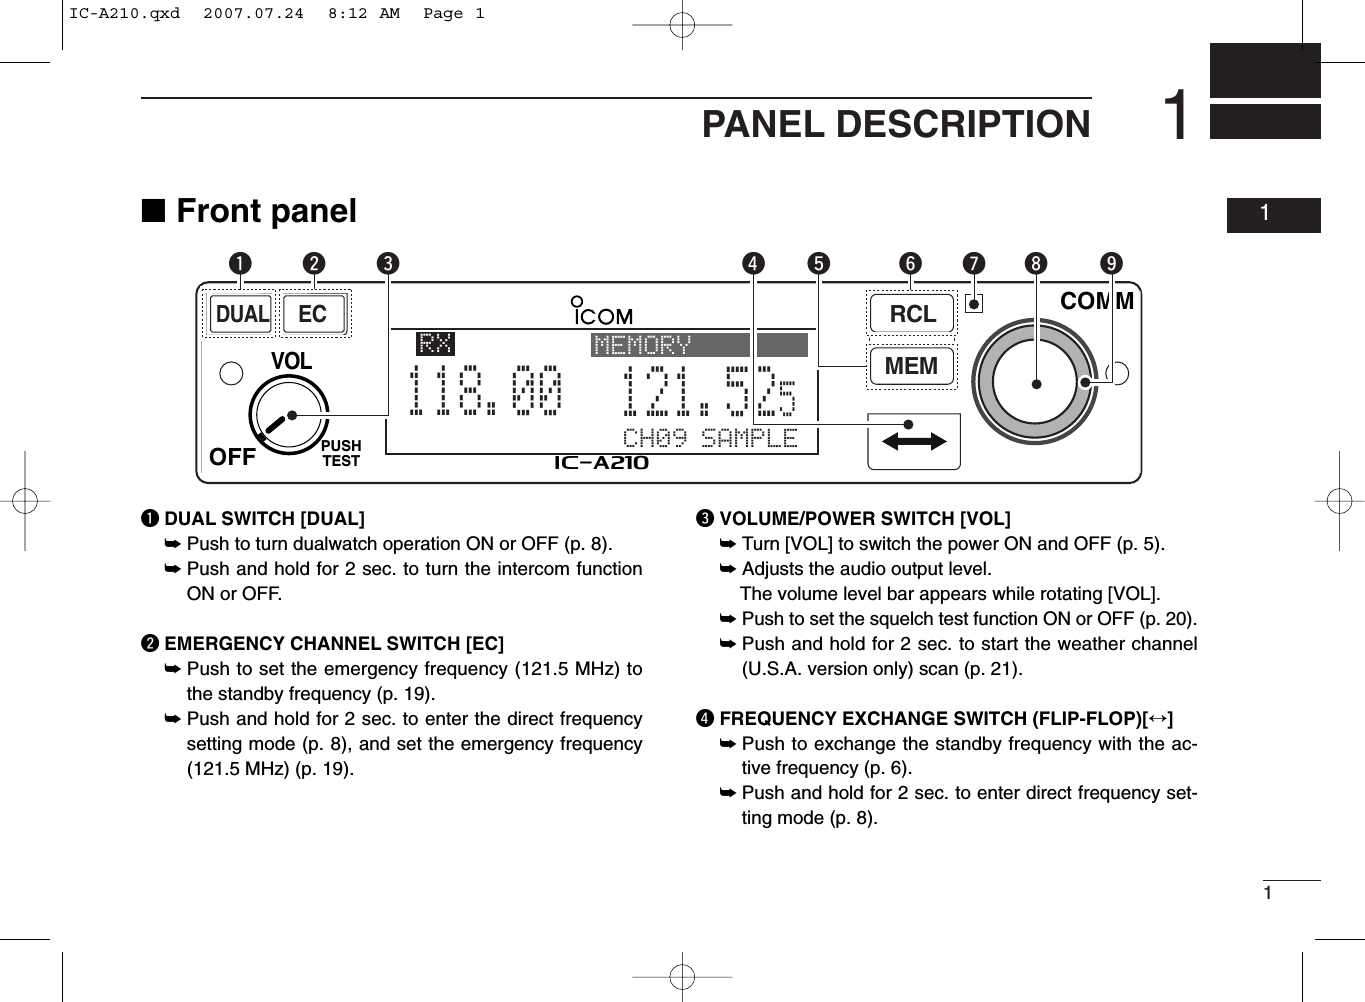 11PANEL DESCRIPTION01■Front panelqDUAL SWITCH [DUAL]➥Push to turn dualwatch operation ON or OFF (p. 8).➥Push and hold for 2 sec. to turn the intercom functionON or OFF.wEMERGENCY CHANNEL SWITCH [EC]➥Push to set the emergency frequency (121.5 MHz) tothe standby frequency (p. 19).➥Push and hold for 2 sec. to enter the direct frequencysetting mode (p. 8), and set the emergency frequency(121.5 MHz) (p. 19).eVOLUME/POWER SWITCH [VOL]➥Turn [VOL] to switch the power ON and OFF (p. 5).➥Adjusts the audio output level.The volume level bar appears while rotating [VOL].➥Push to set the squelch test function ON or OFF (p. 20).➥Push and hold for 2 sec. to start the weather channel(U.S.A. version only) scan (p. 21).rFREQUENCY EXCHANGE SWITCH (FLIP-FLOP)[↔]➥Push to exchange the standby frequency with the ac-tive frequency (p. 6).➥Push and hold for 2 sec. to enter direct frequency set-ting mode (p. 8).RCLMEMOFFVOLPUSHTESTCOMMDUALECiA210CH09 SAMPLE121.525118.00RX MEMORYeytriouqwIC-A210.qxd  2007.07.24  8:12 AM  Page 1